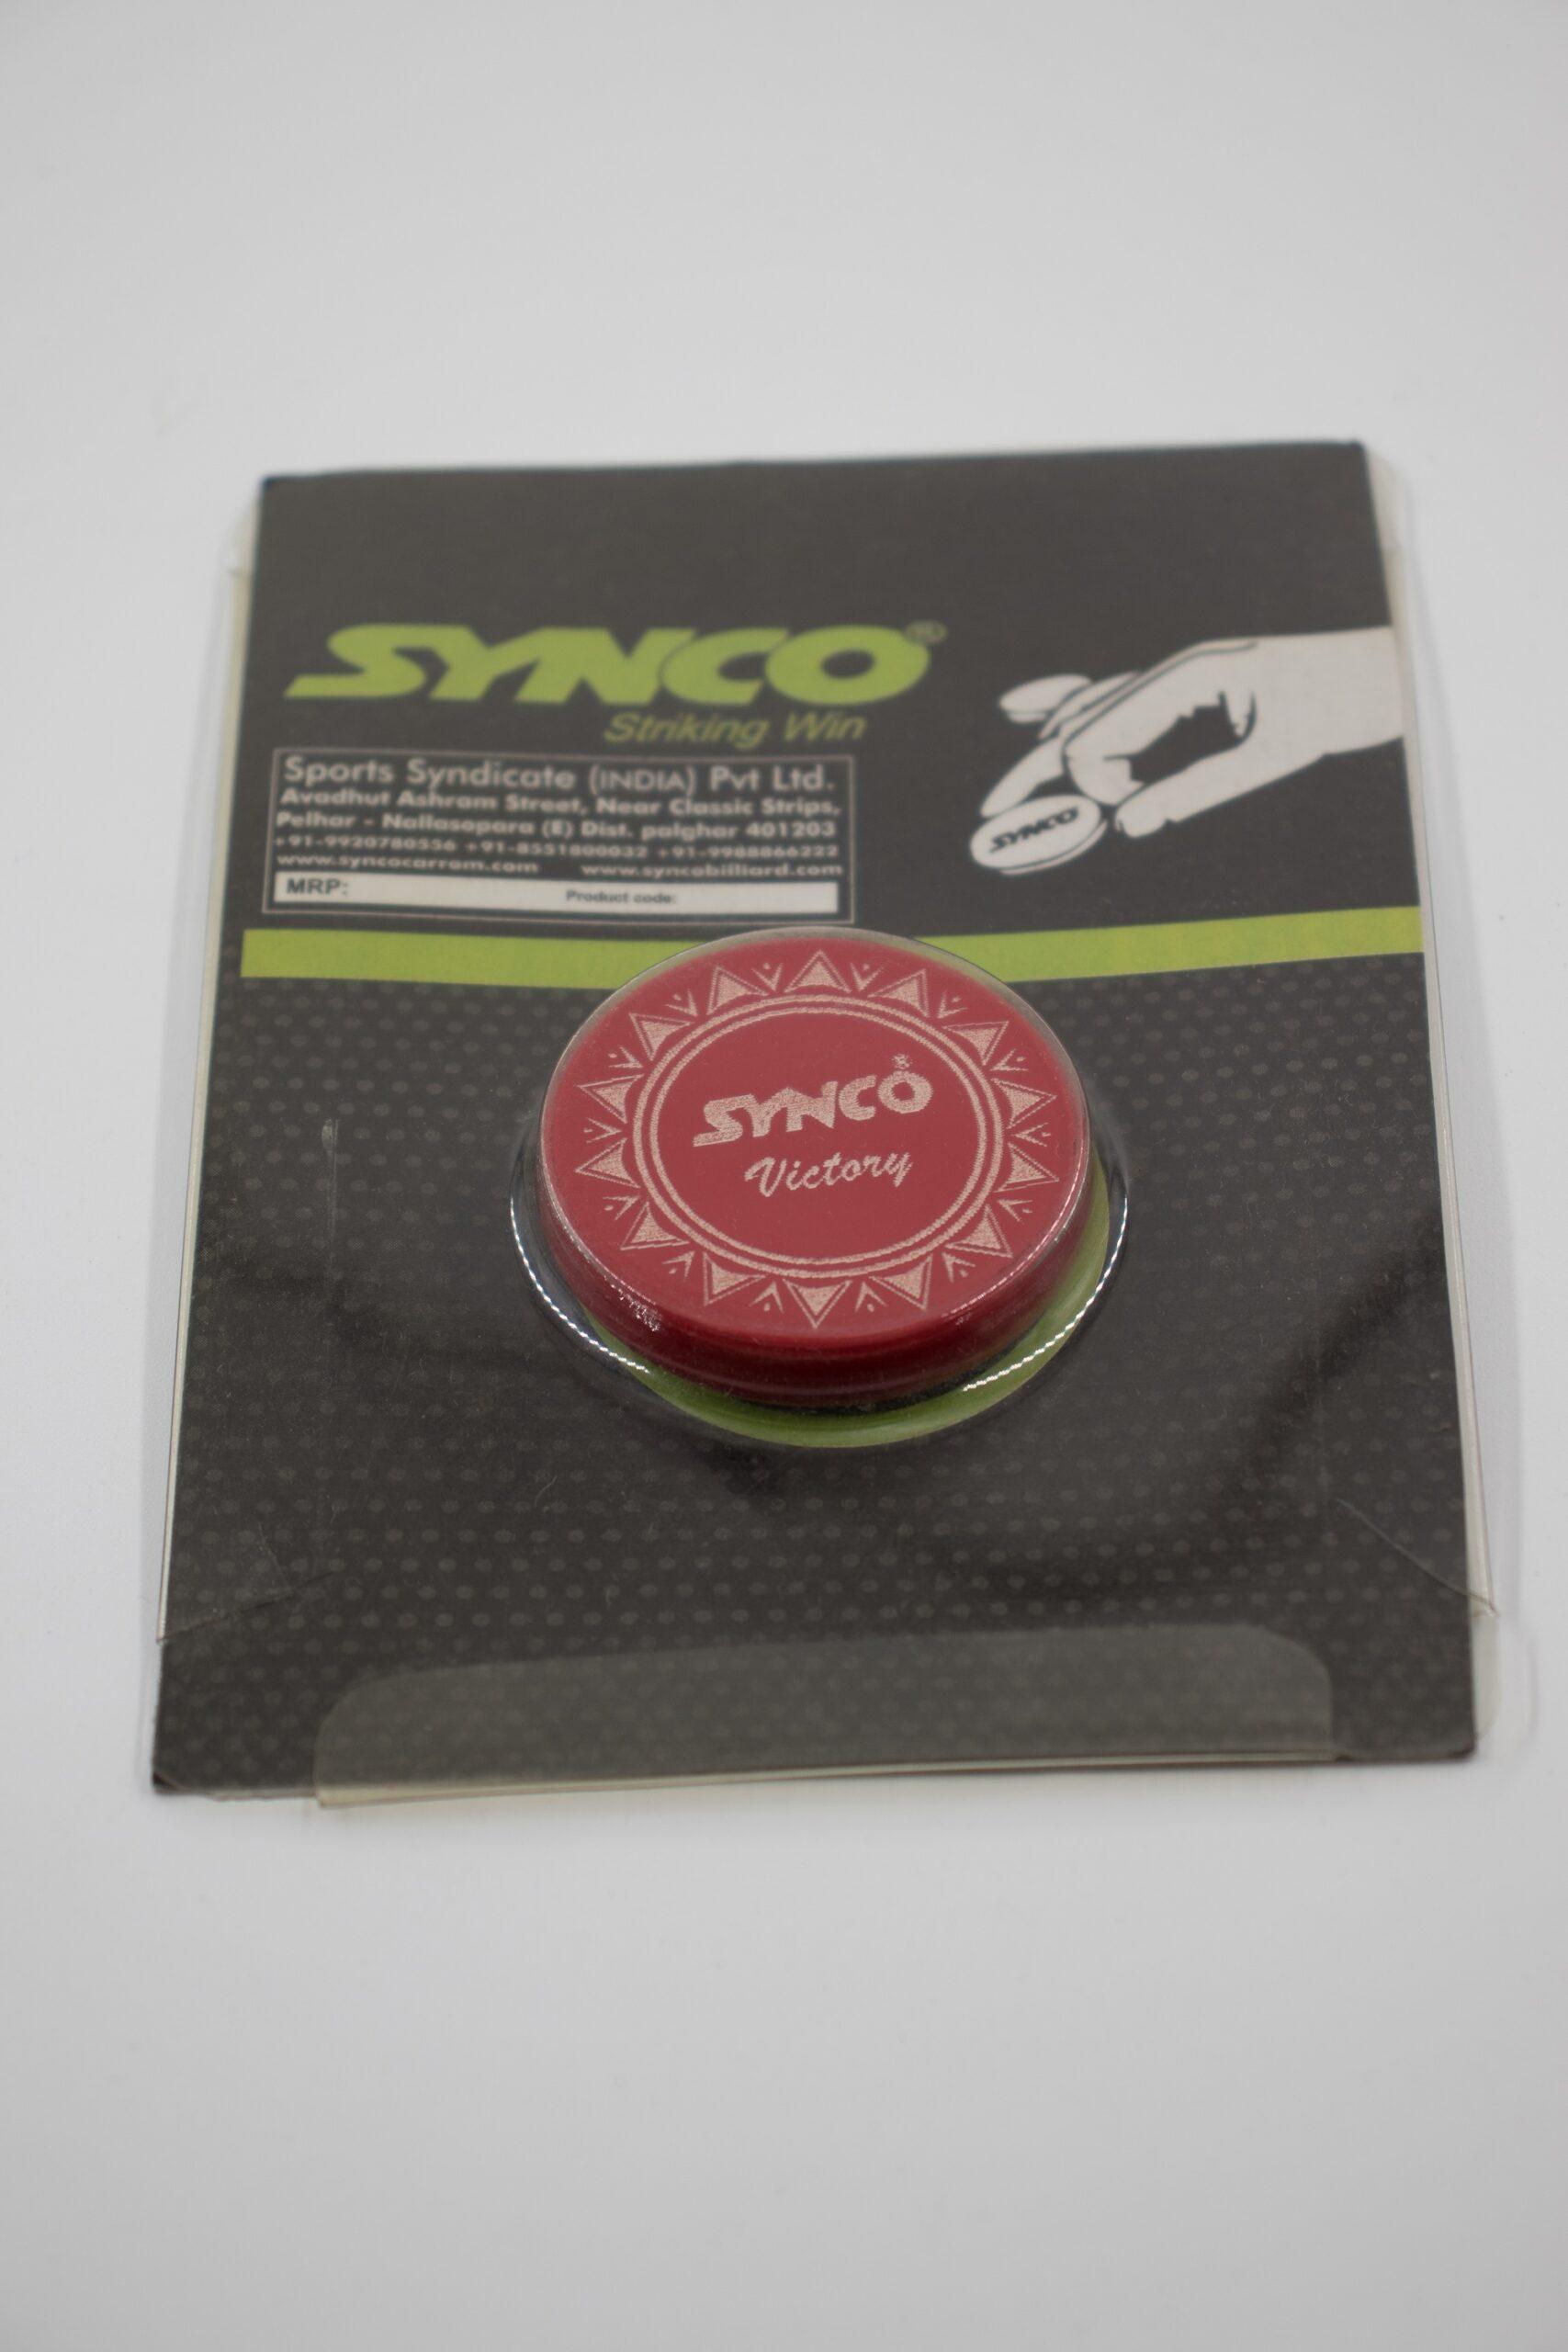 Synco Victory carrom striker, Assorted color - 5